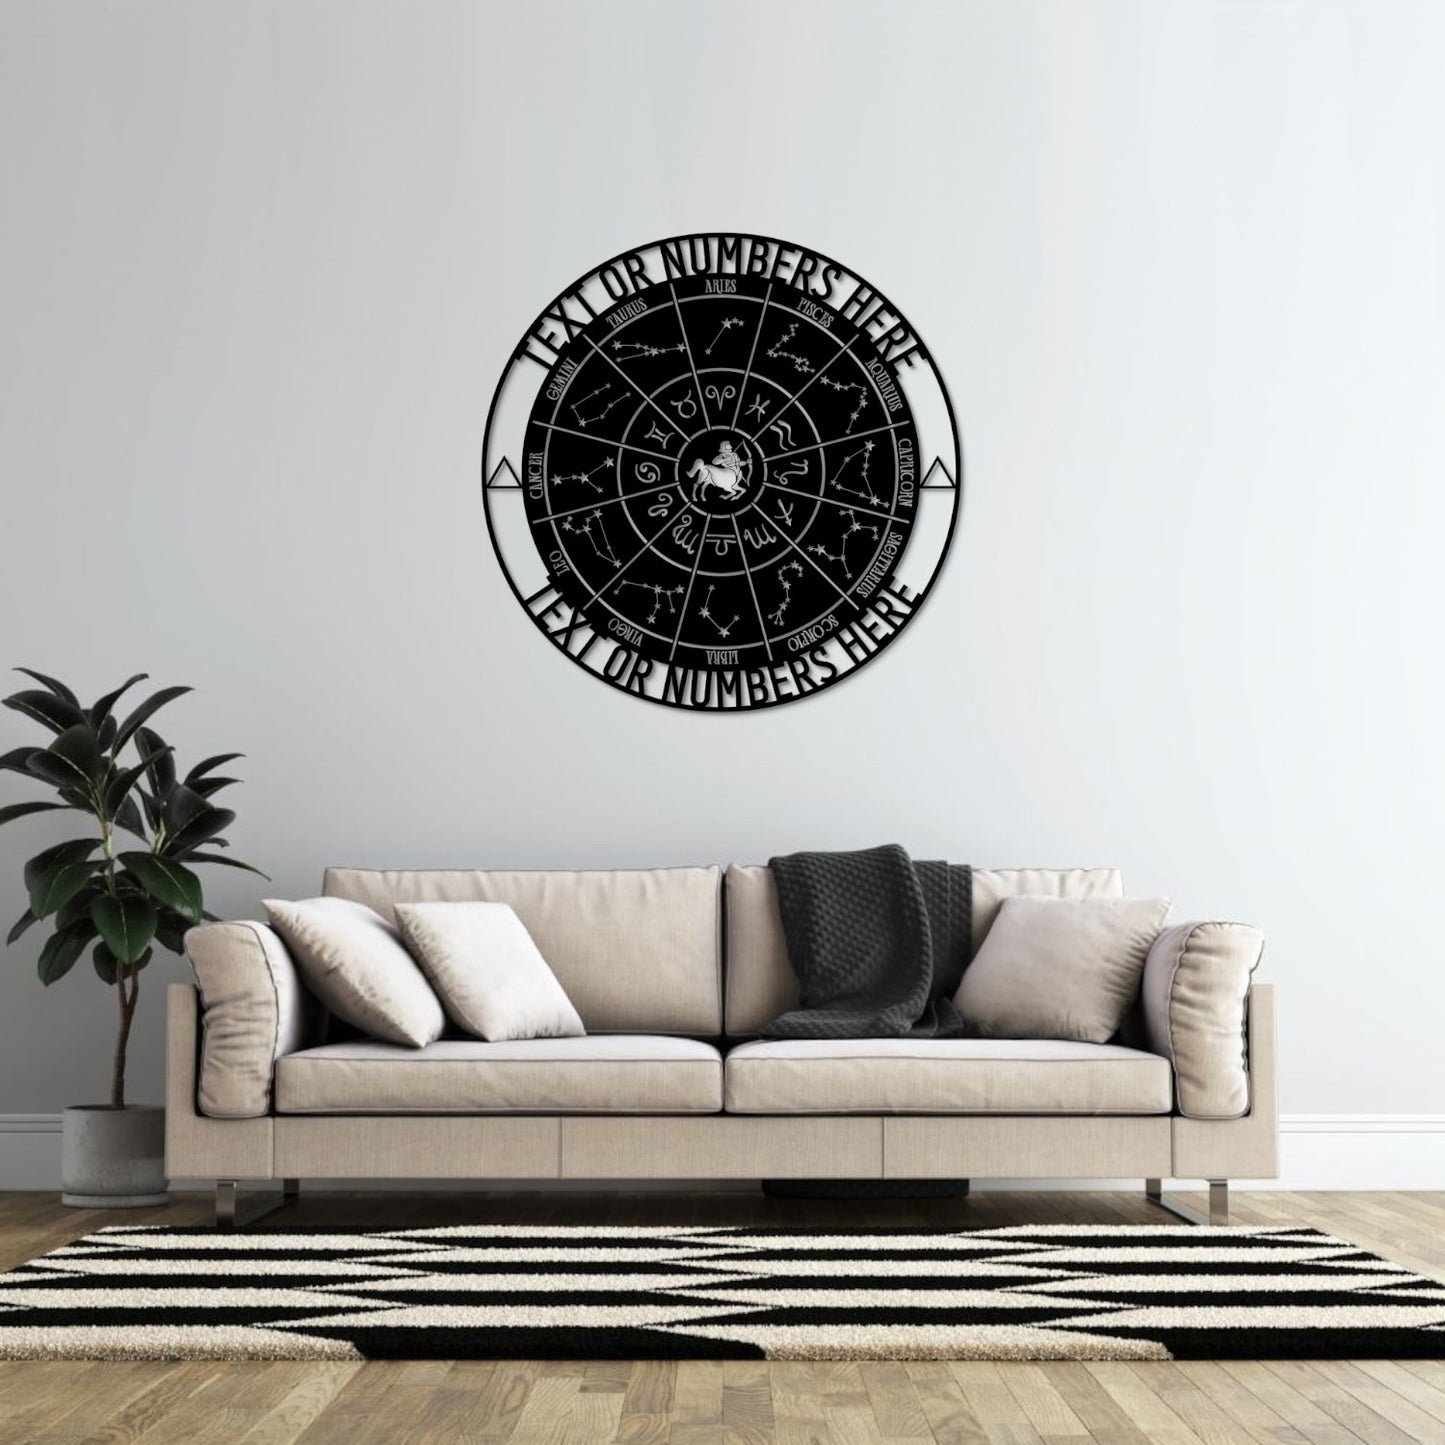 Personalized Sagittarius Zodiac Wheel Name Metal Sign Gift. Custom Astrology Wall Decor. Celestial Gifts. Decorative Star Sign Wall Hanging